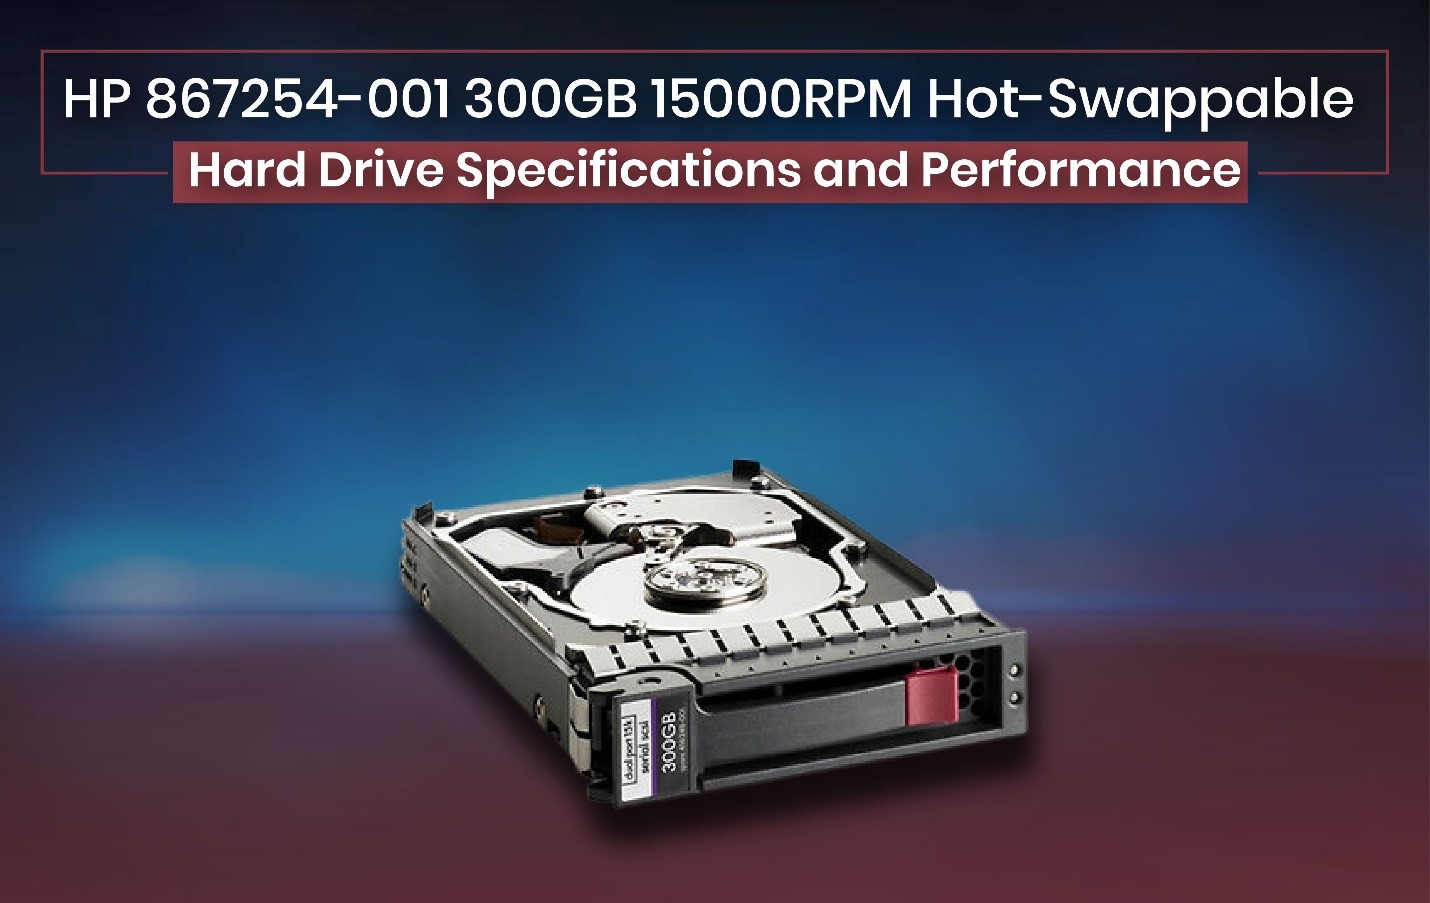 HP 867254-001 300GB 15000RPM Hot-Swappable Hard Drive Specifications and Performance